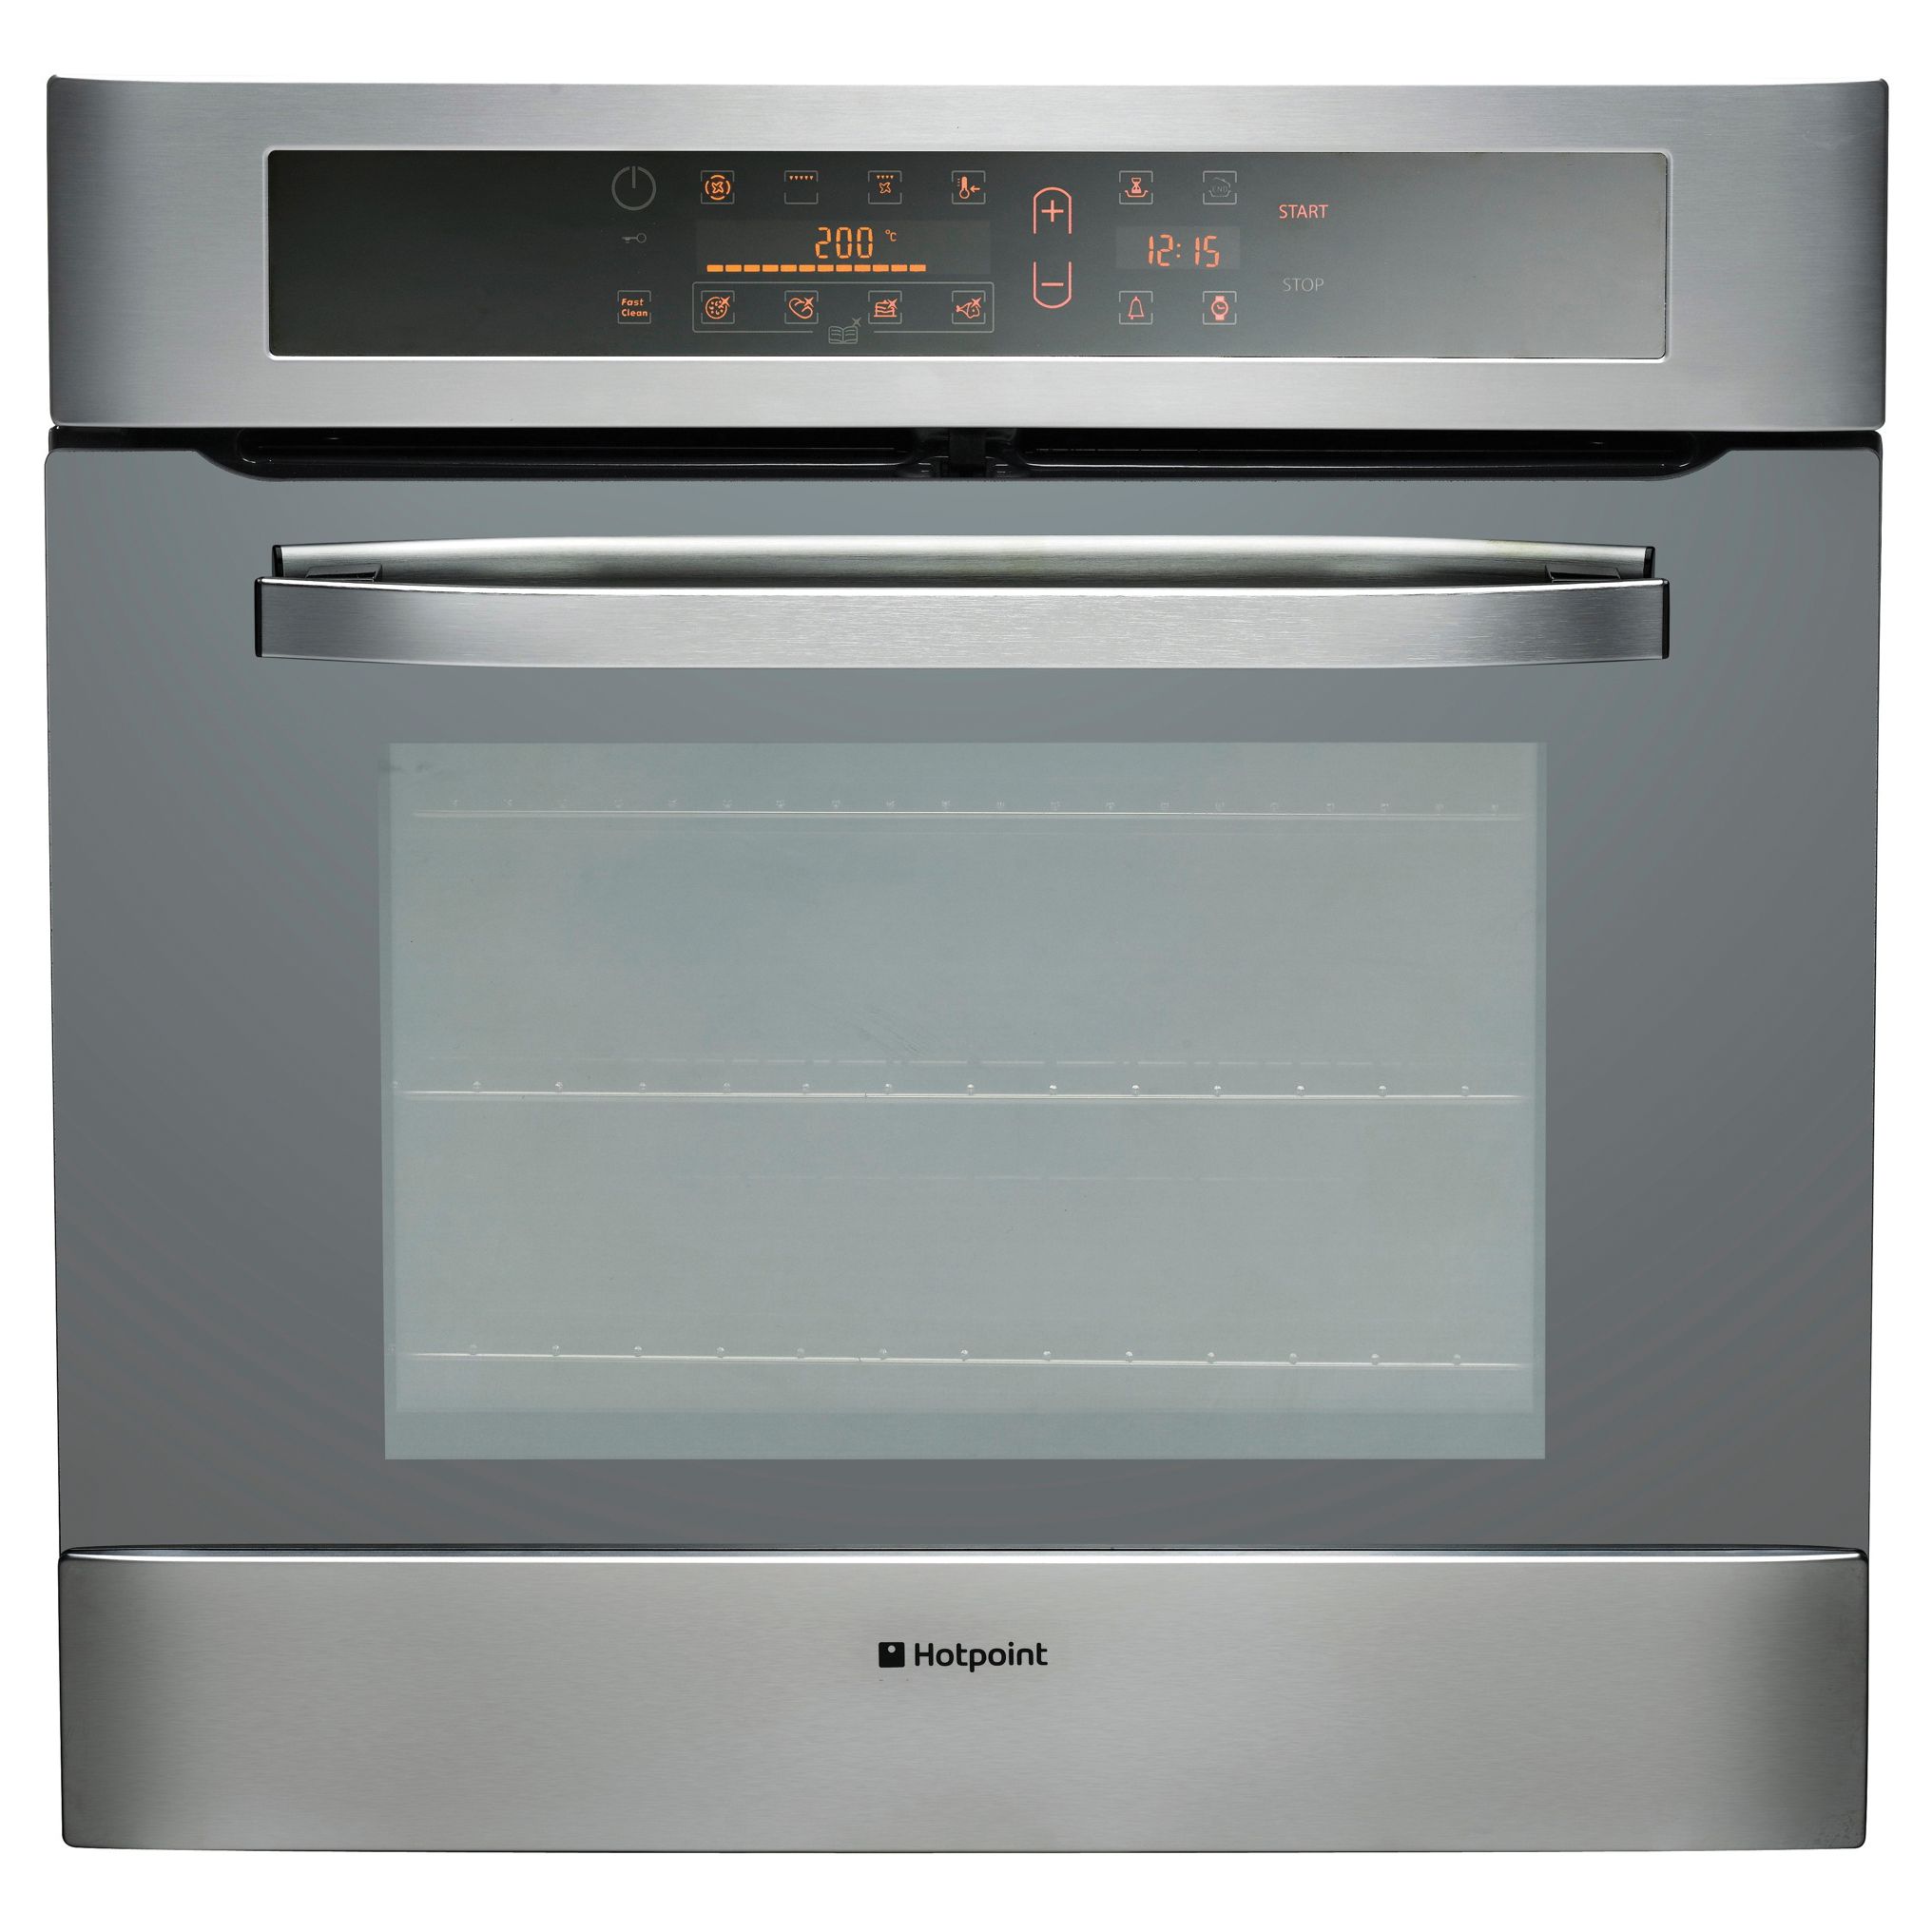 Hotpoint SH103PX Single Electric Oven, Stainless Steel at John Lewis